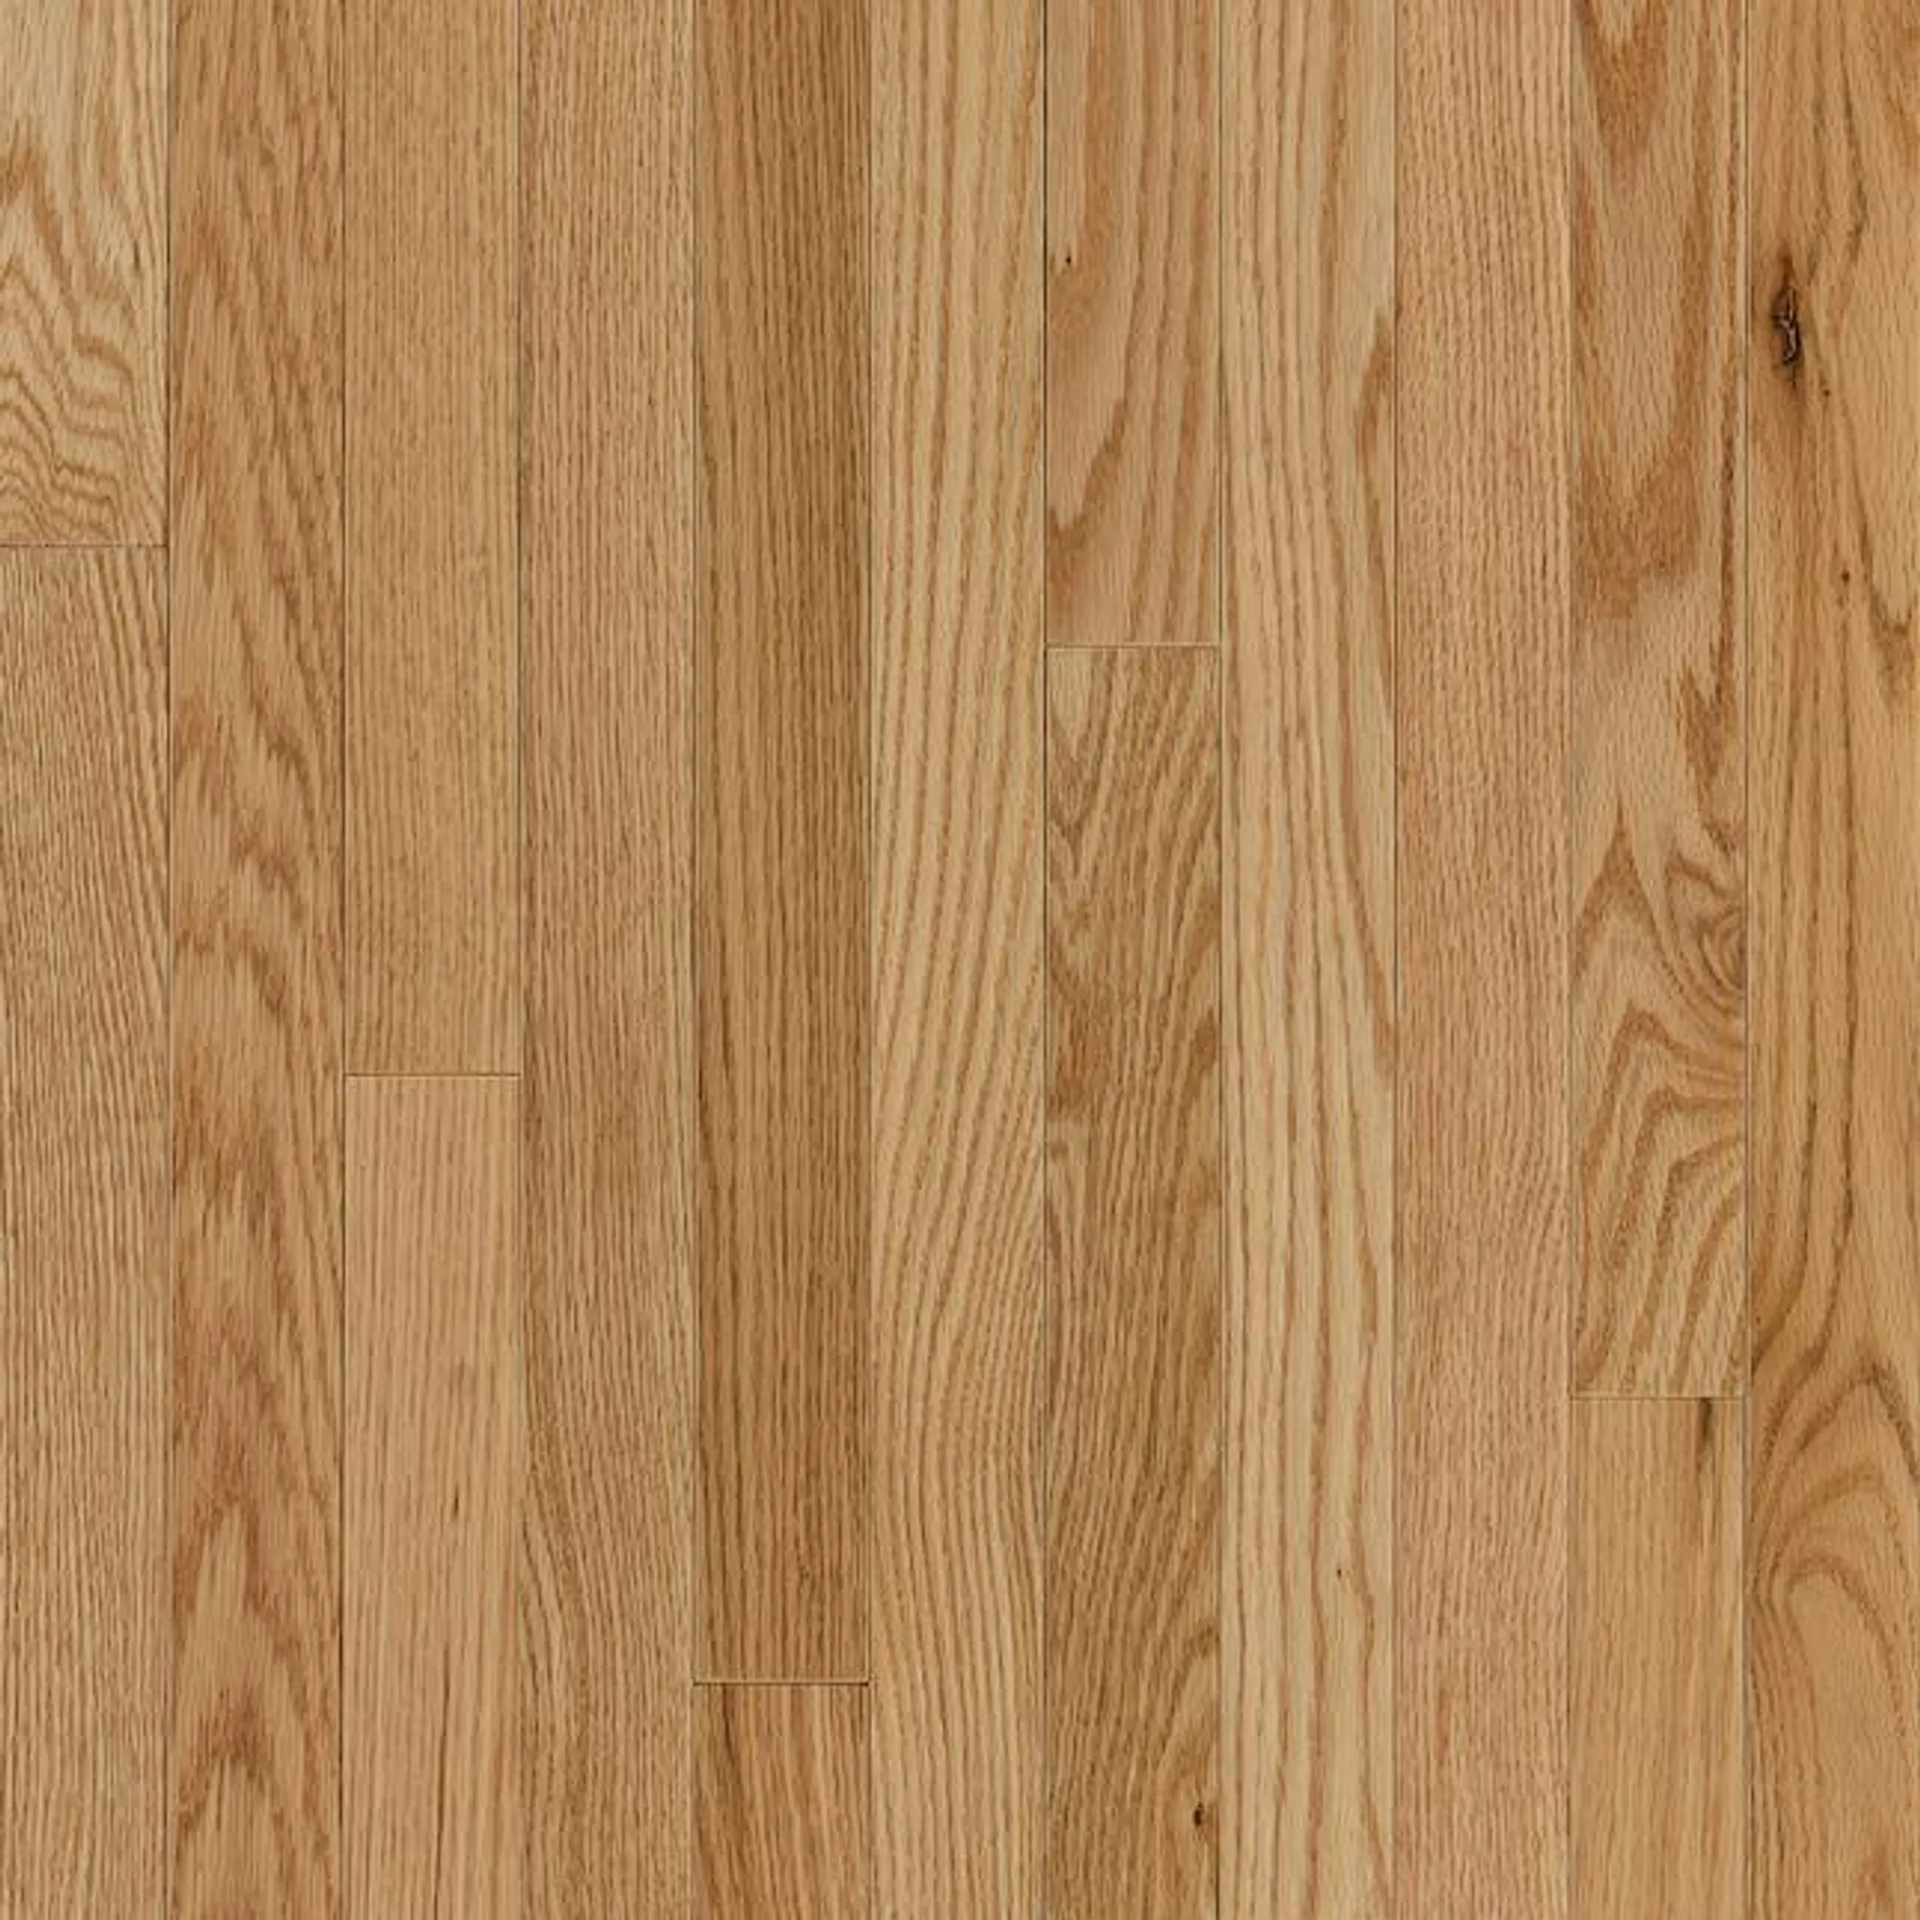 Bruce America's Best Choice Natural Red Oak 2-1/4-in W x 3/4-in T Varying Length Smooth/Traditional Solid Hardwood Flooring (20-sq ft / Carton)